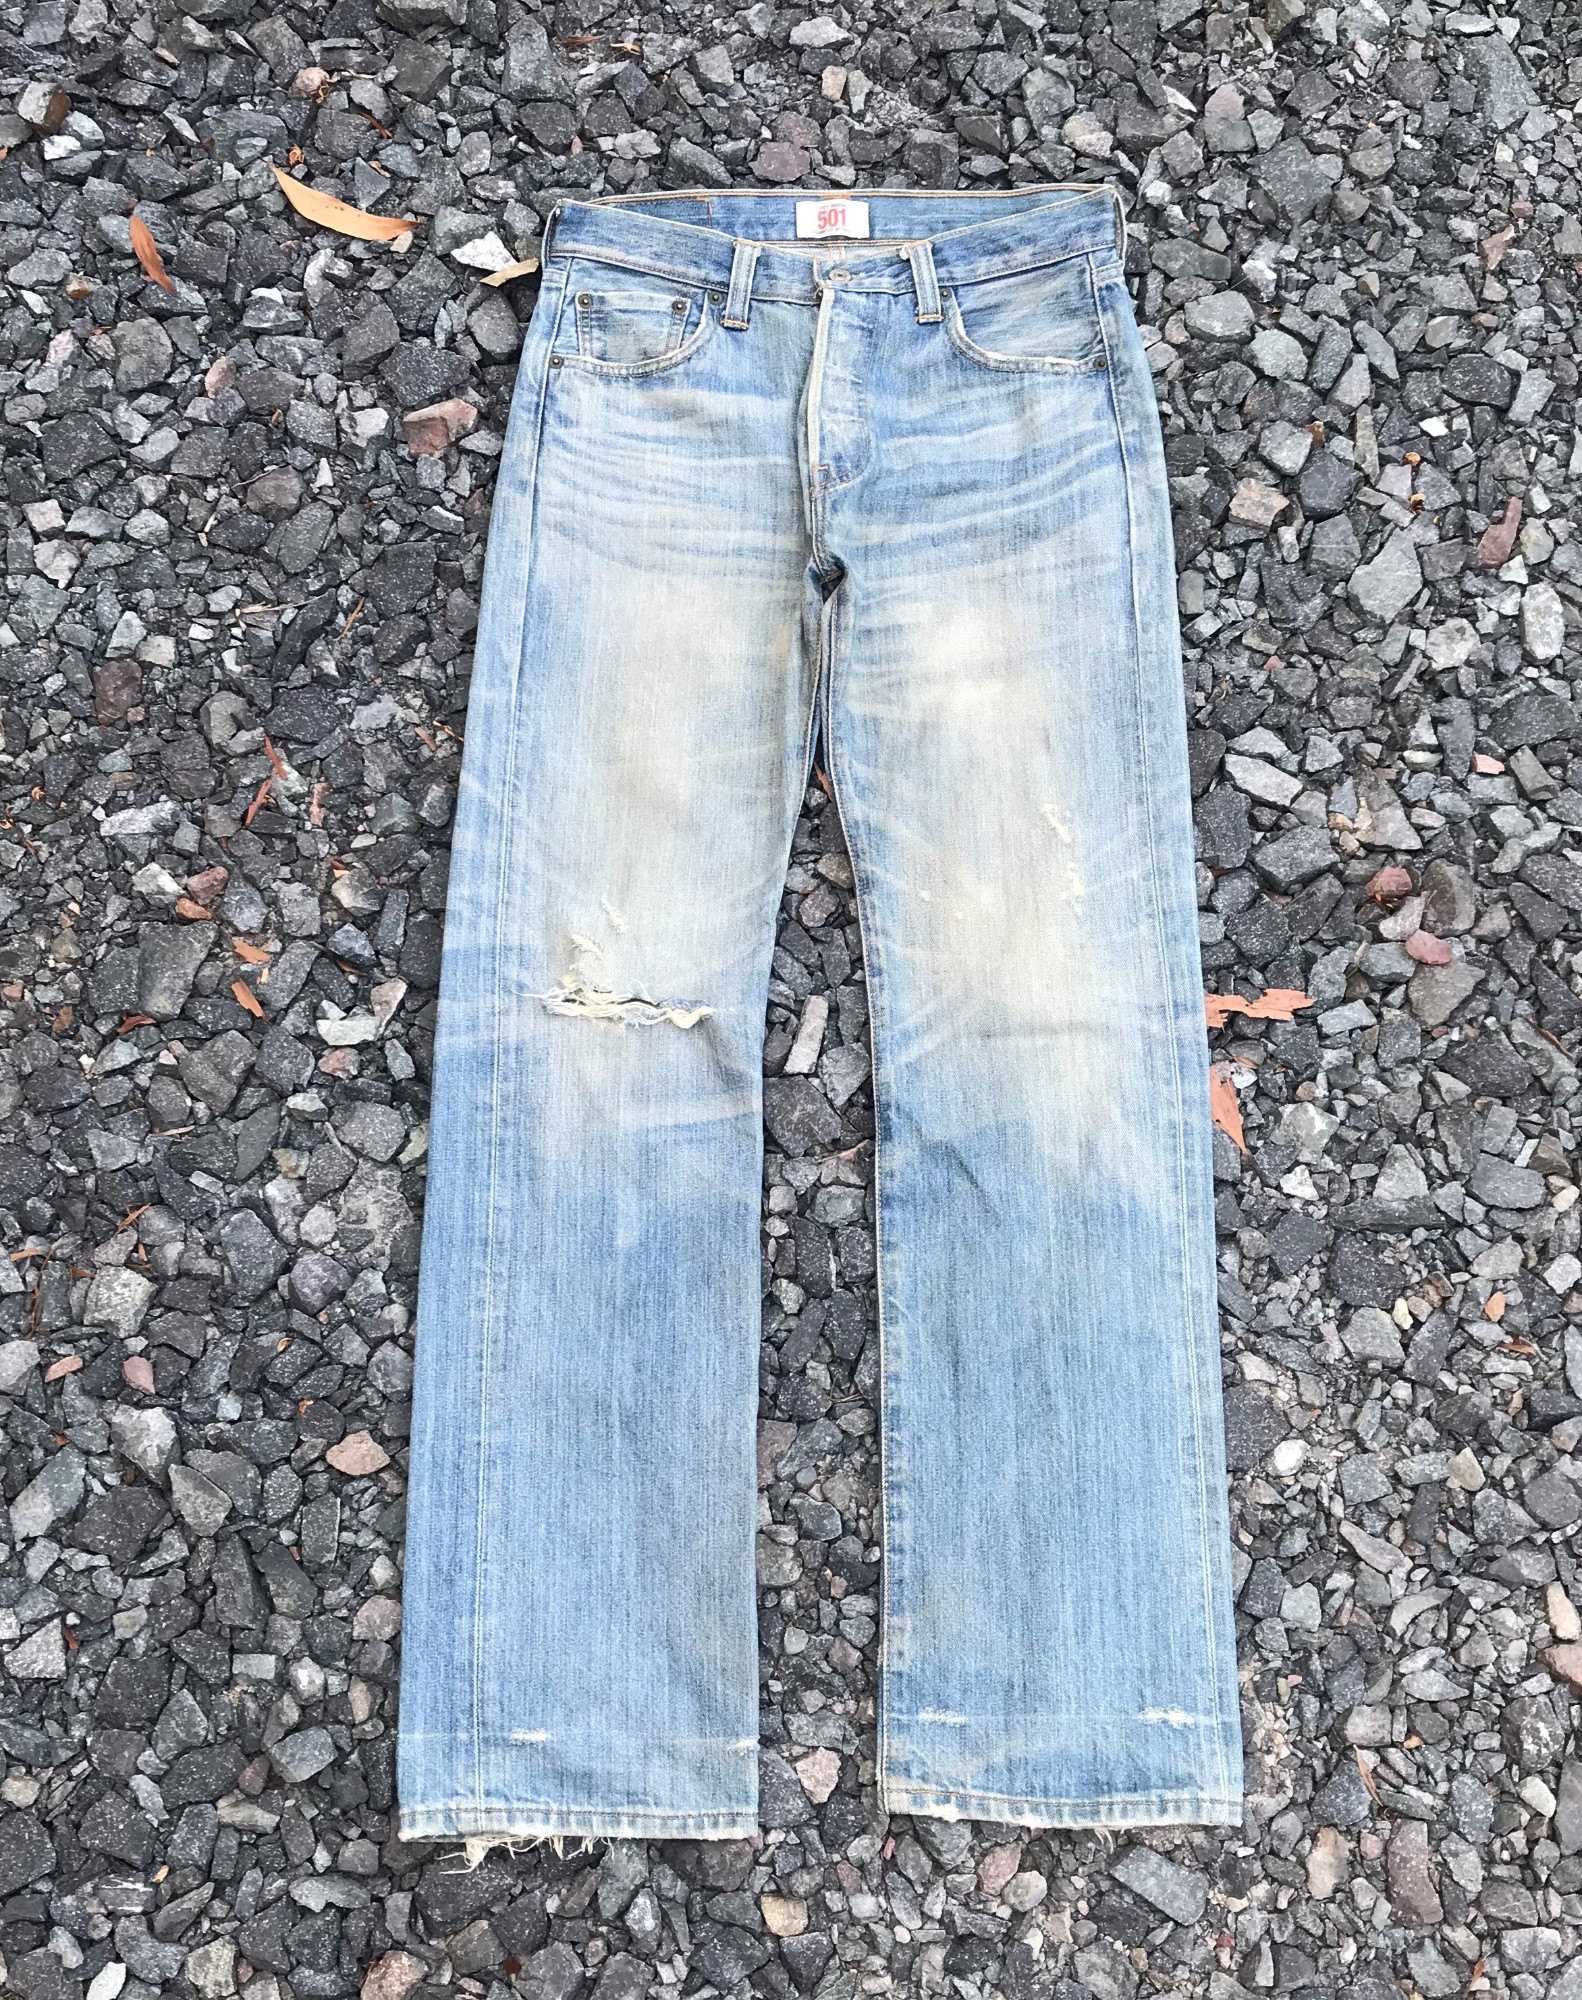 Vintage Levis 501 faded Distressed denim Waist 30x32 inch trashed ripped kurt cobain style - 1